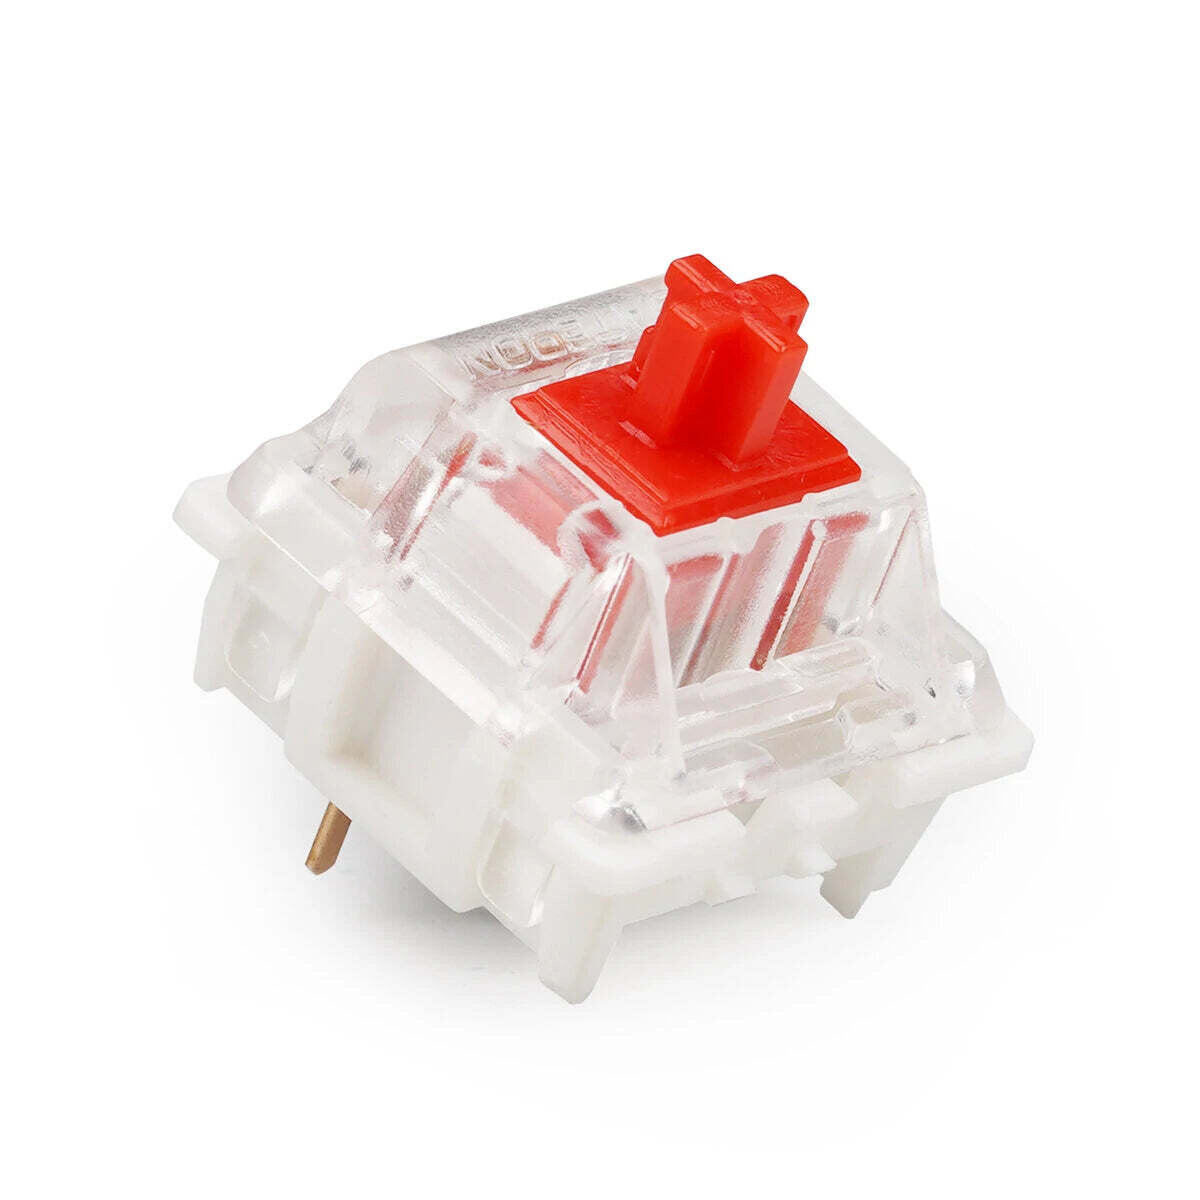 Sofle Key Switch Pack Gateron Silent Red (PCB Mount)